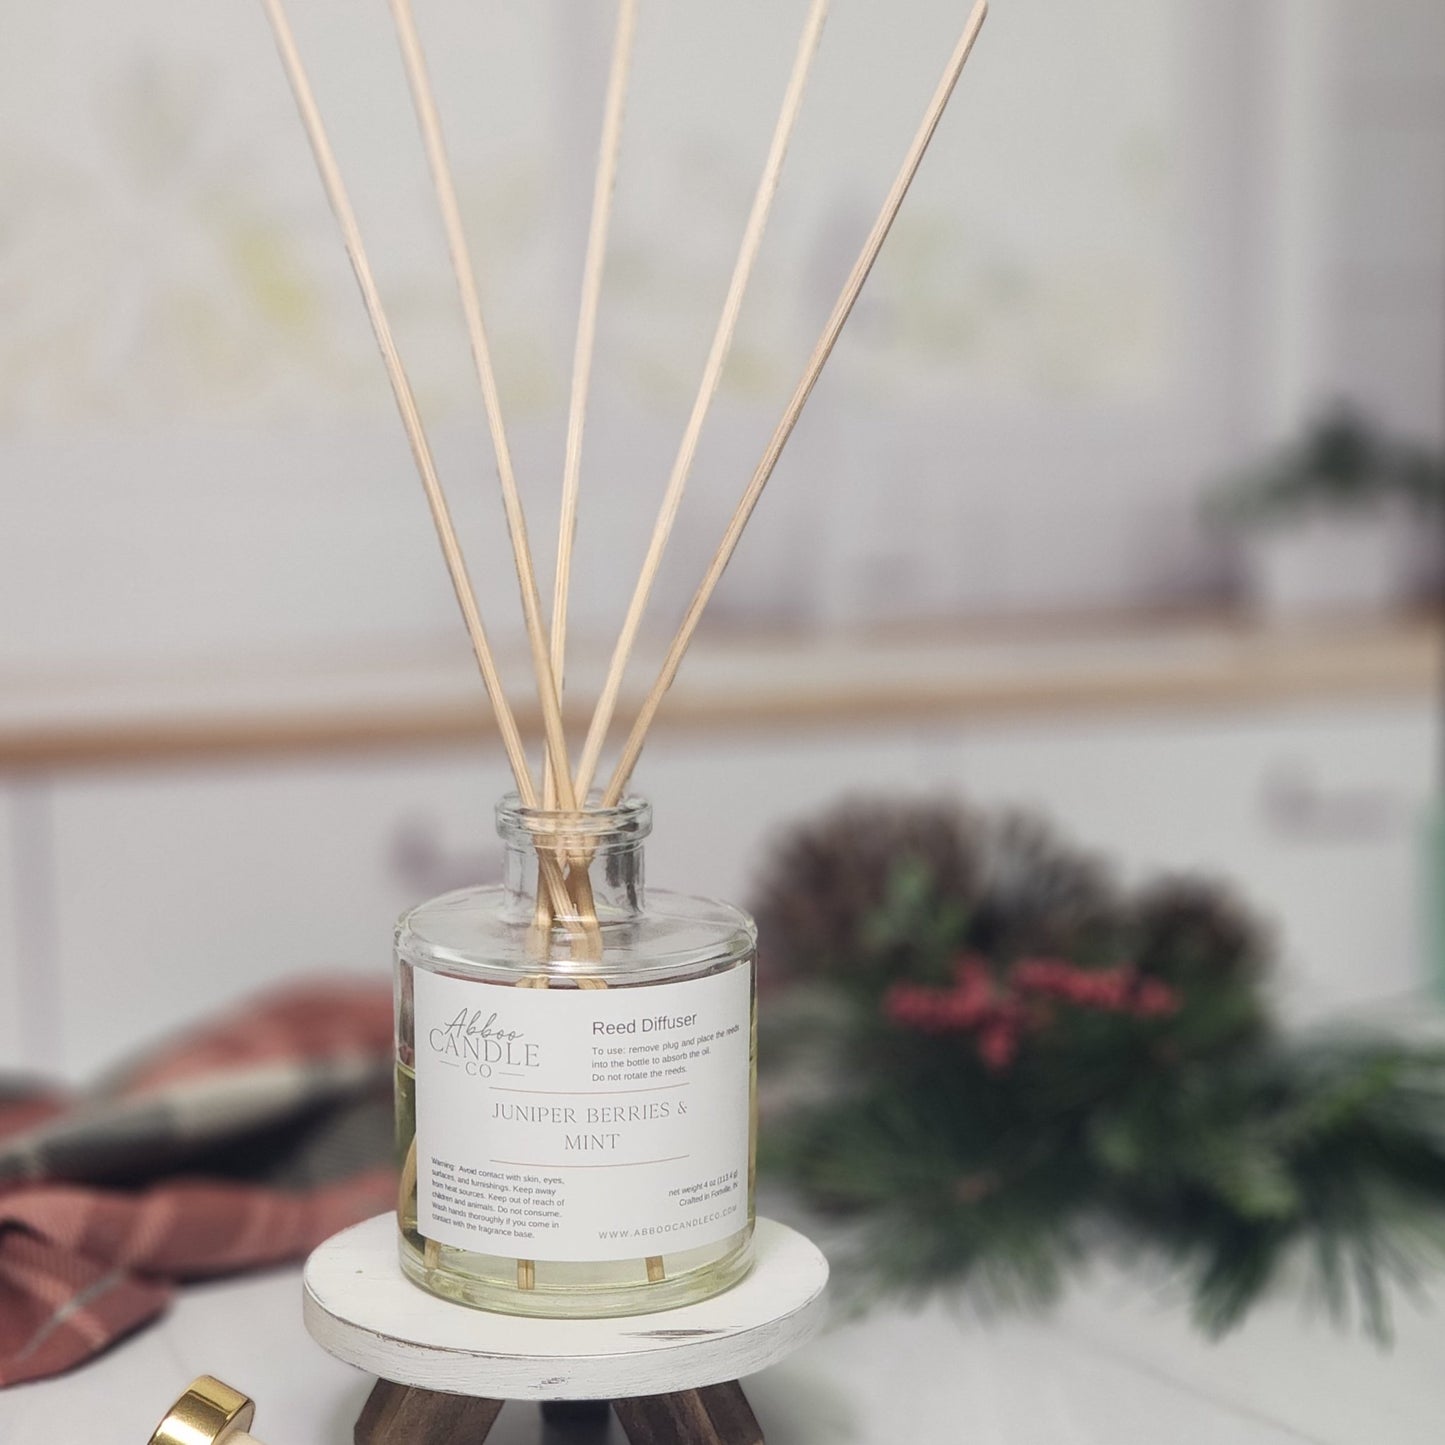 Reed Diffuser - Juniper Berries and Mint - Abboo Candle Co